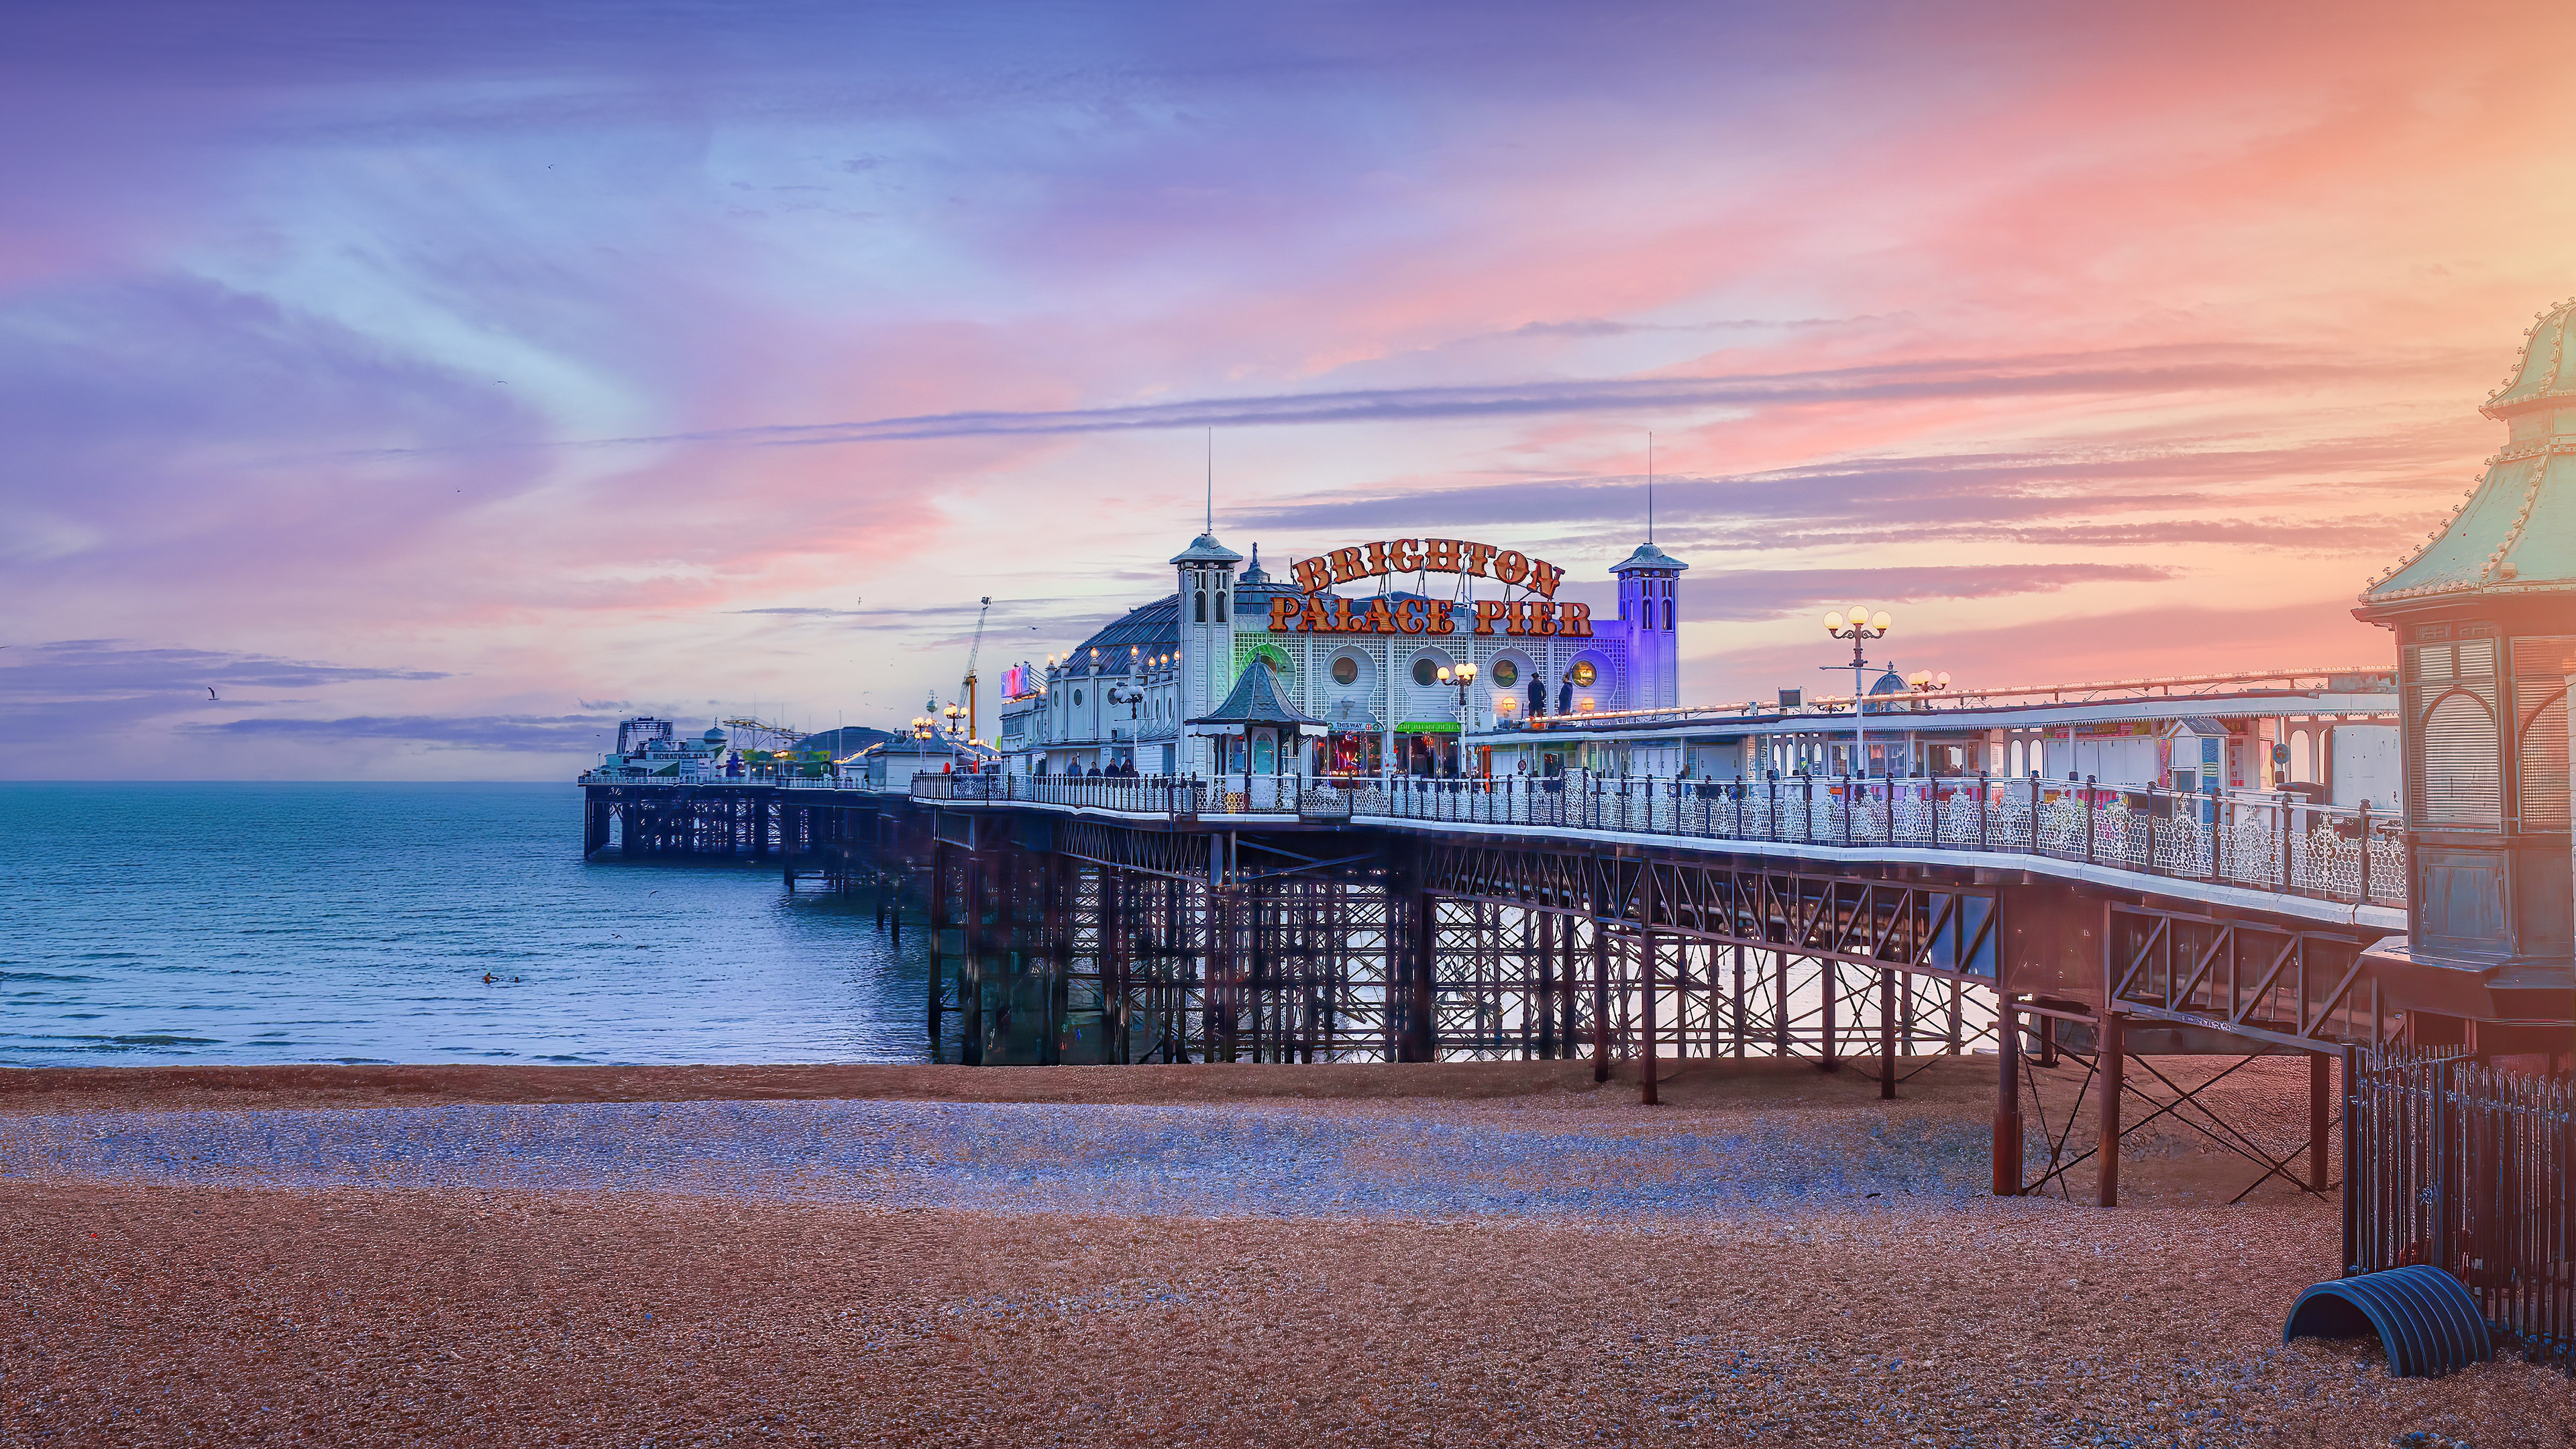 Rides above the tide - Brighton Pier at sunset, England, UK by Peppy Graphics